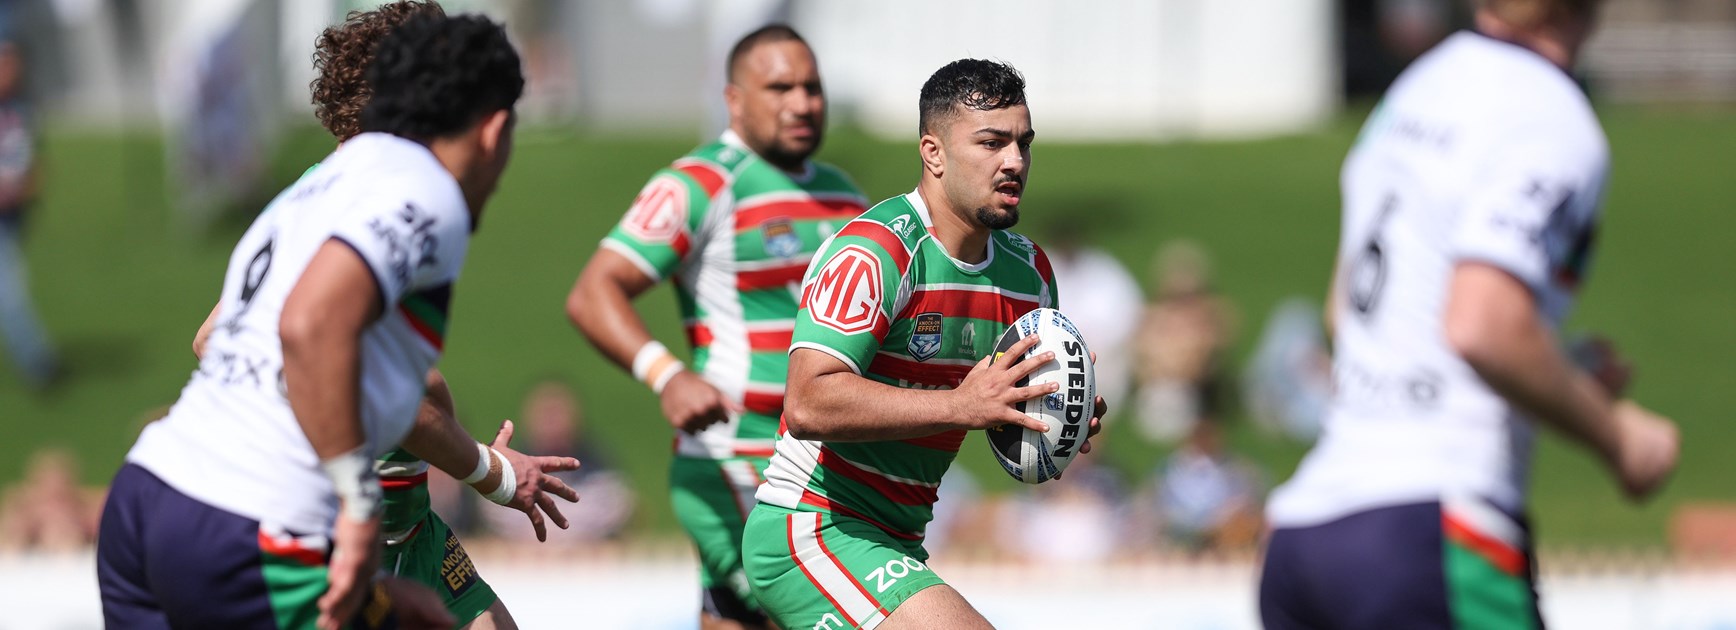 Rabbitohs prevail over Warriors to set up Bears showdown